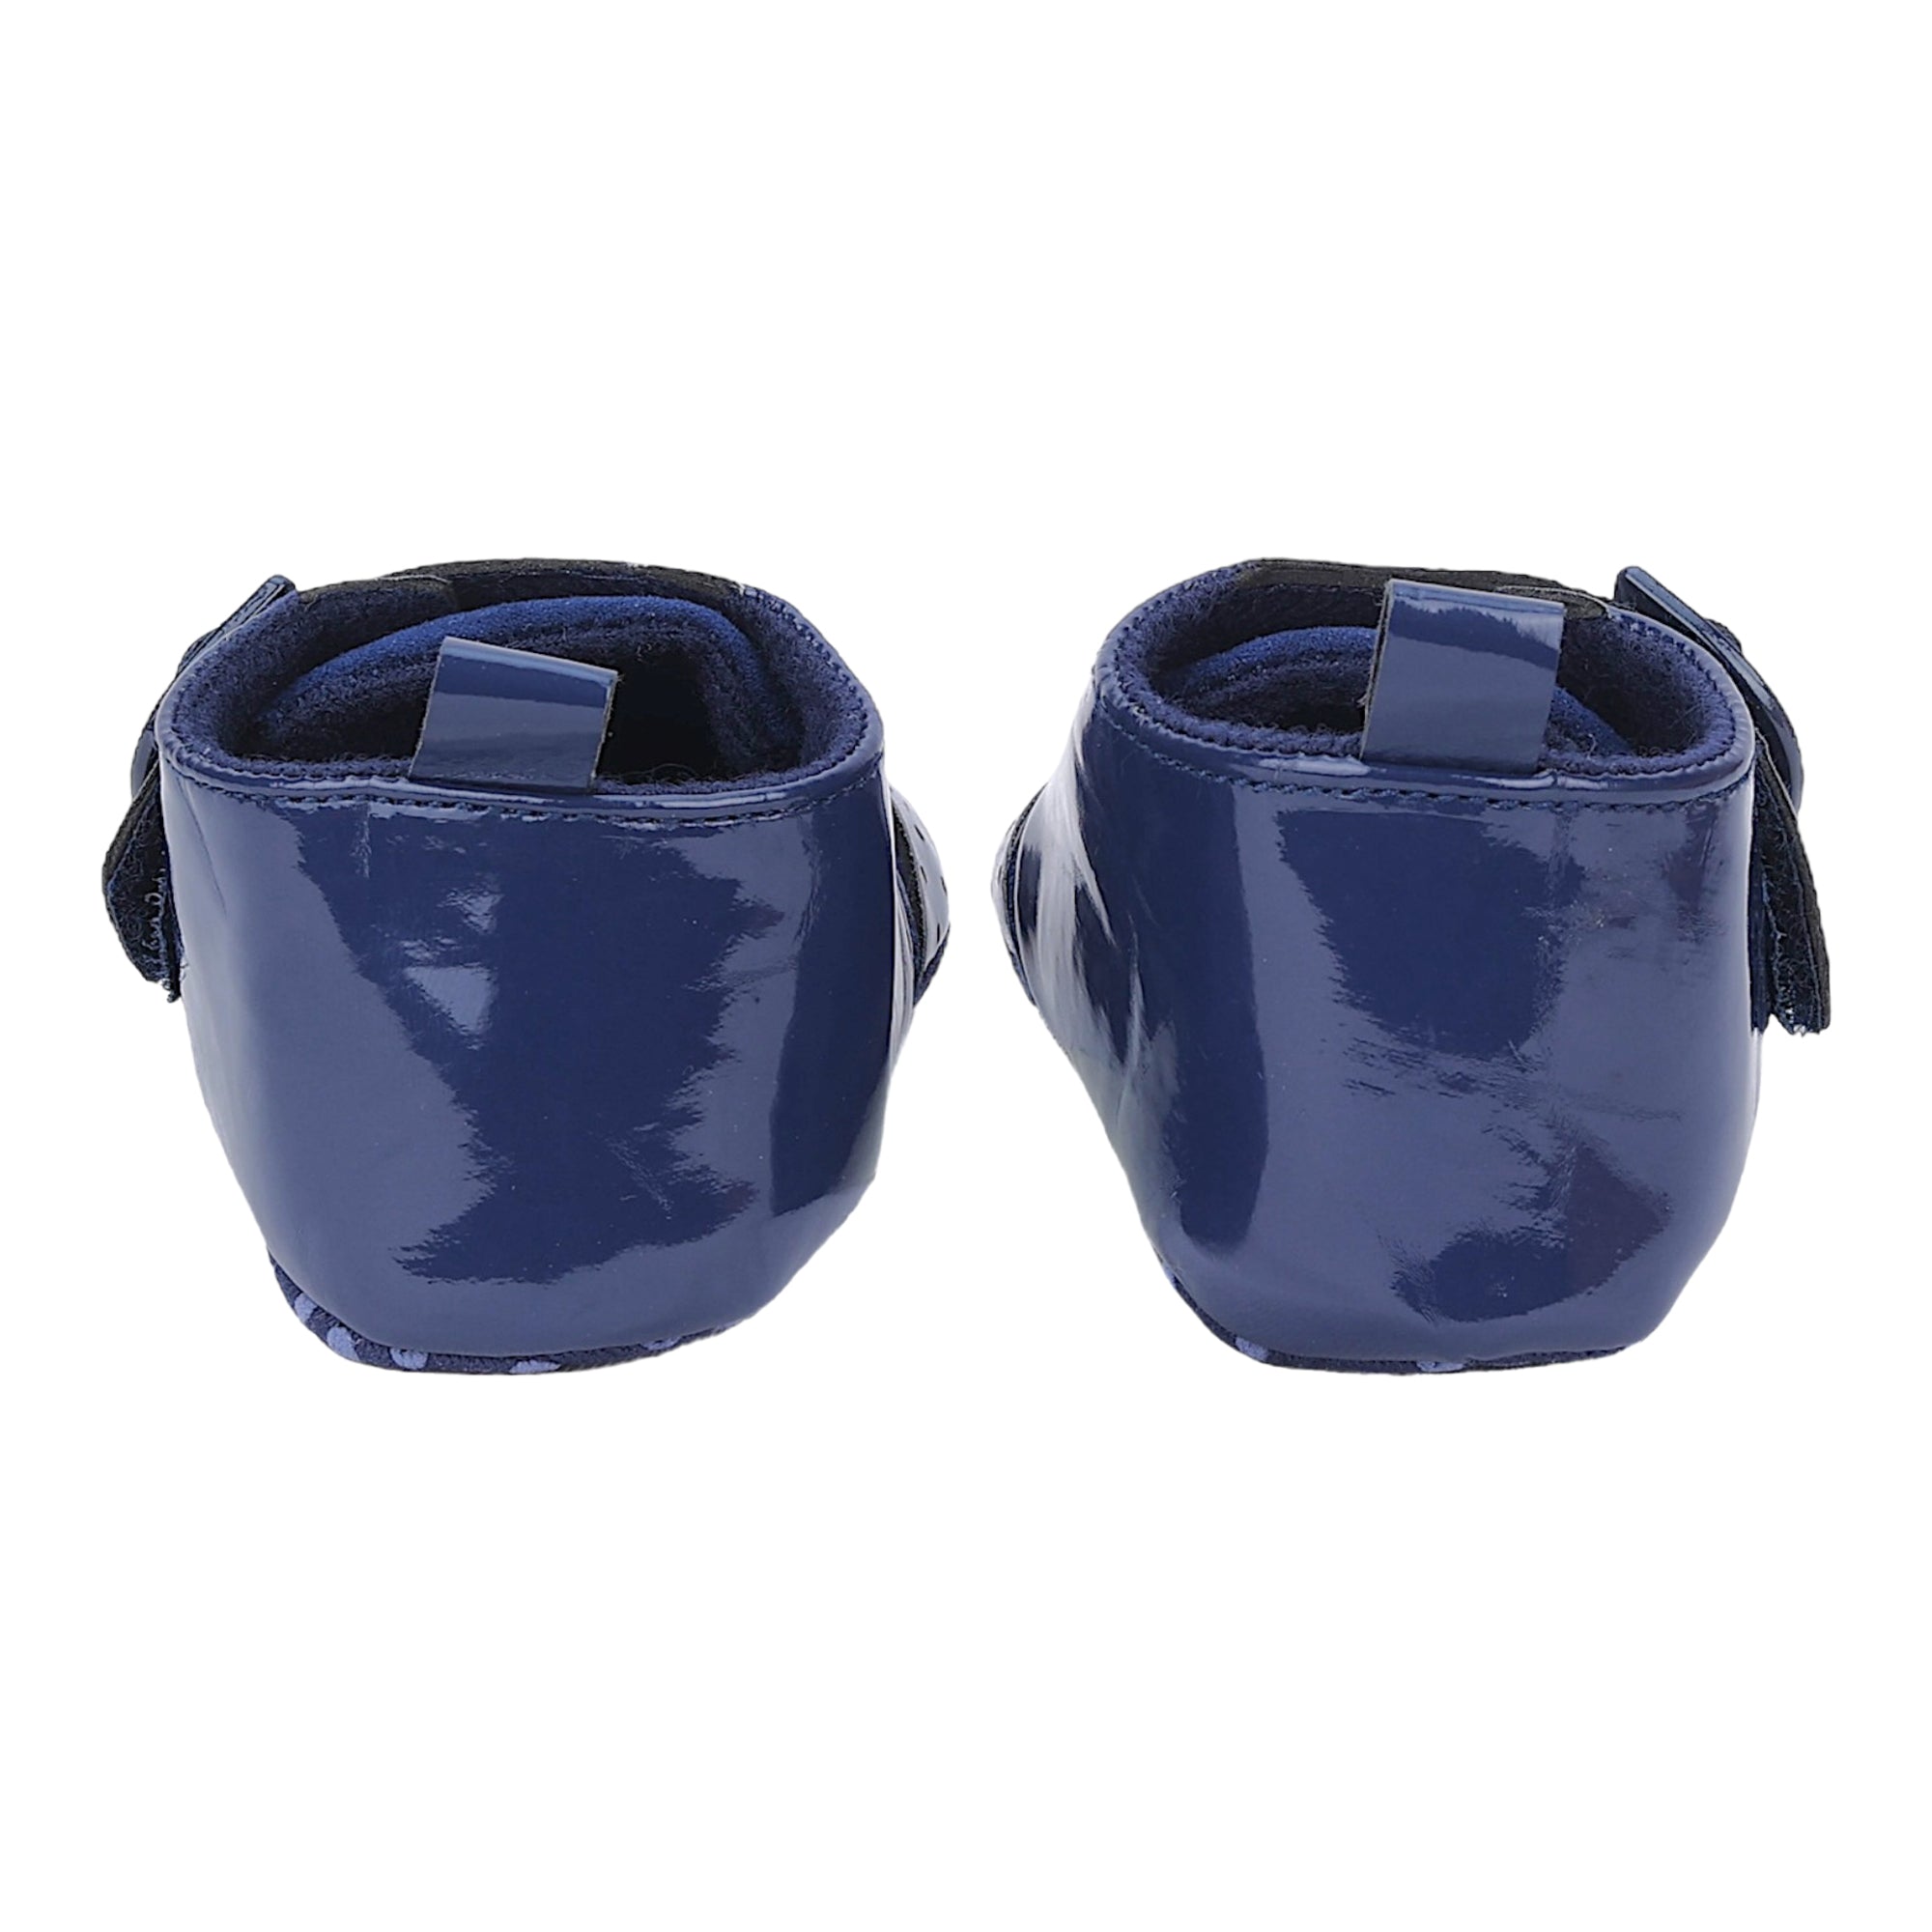 Baby Moo Breathable Buckle Closure Patent Leather Anti-Skid Ballerina Booties - Navy Blue